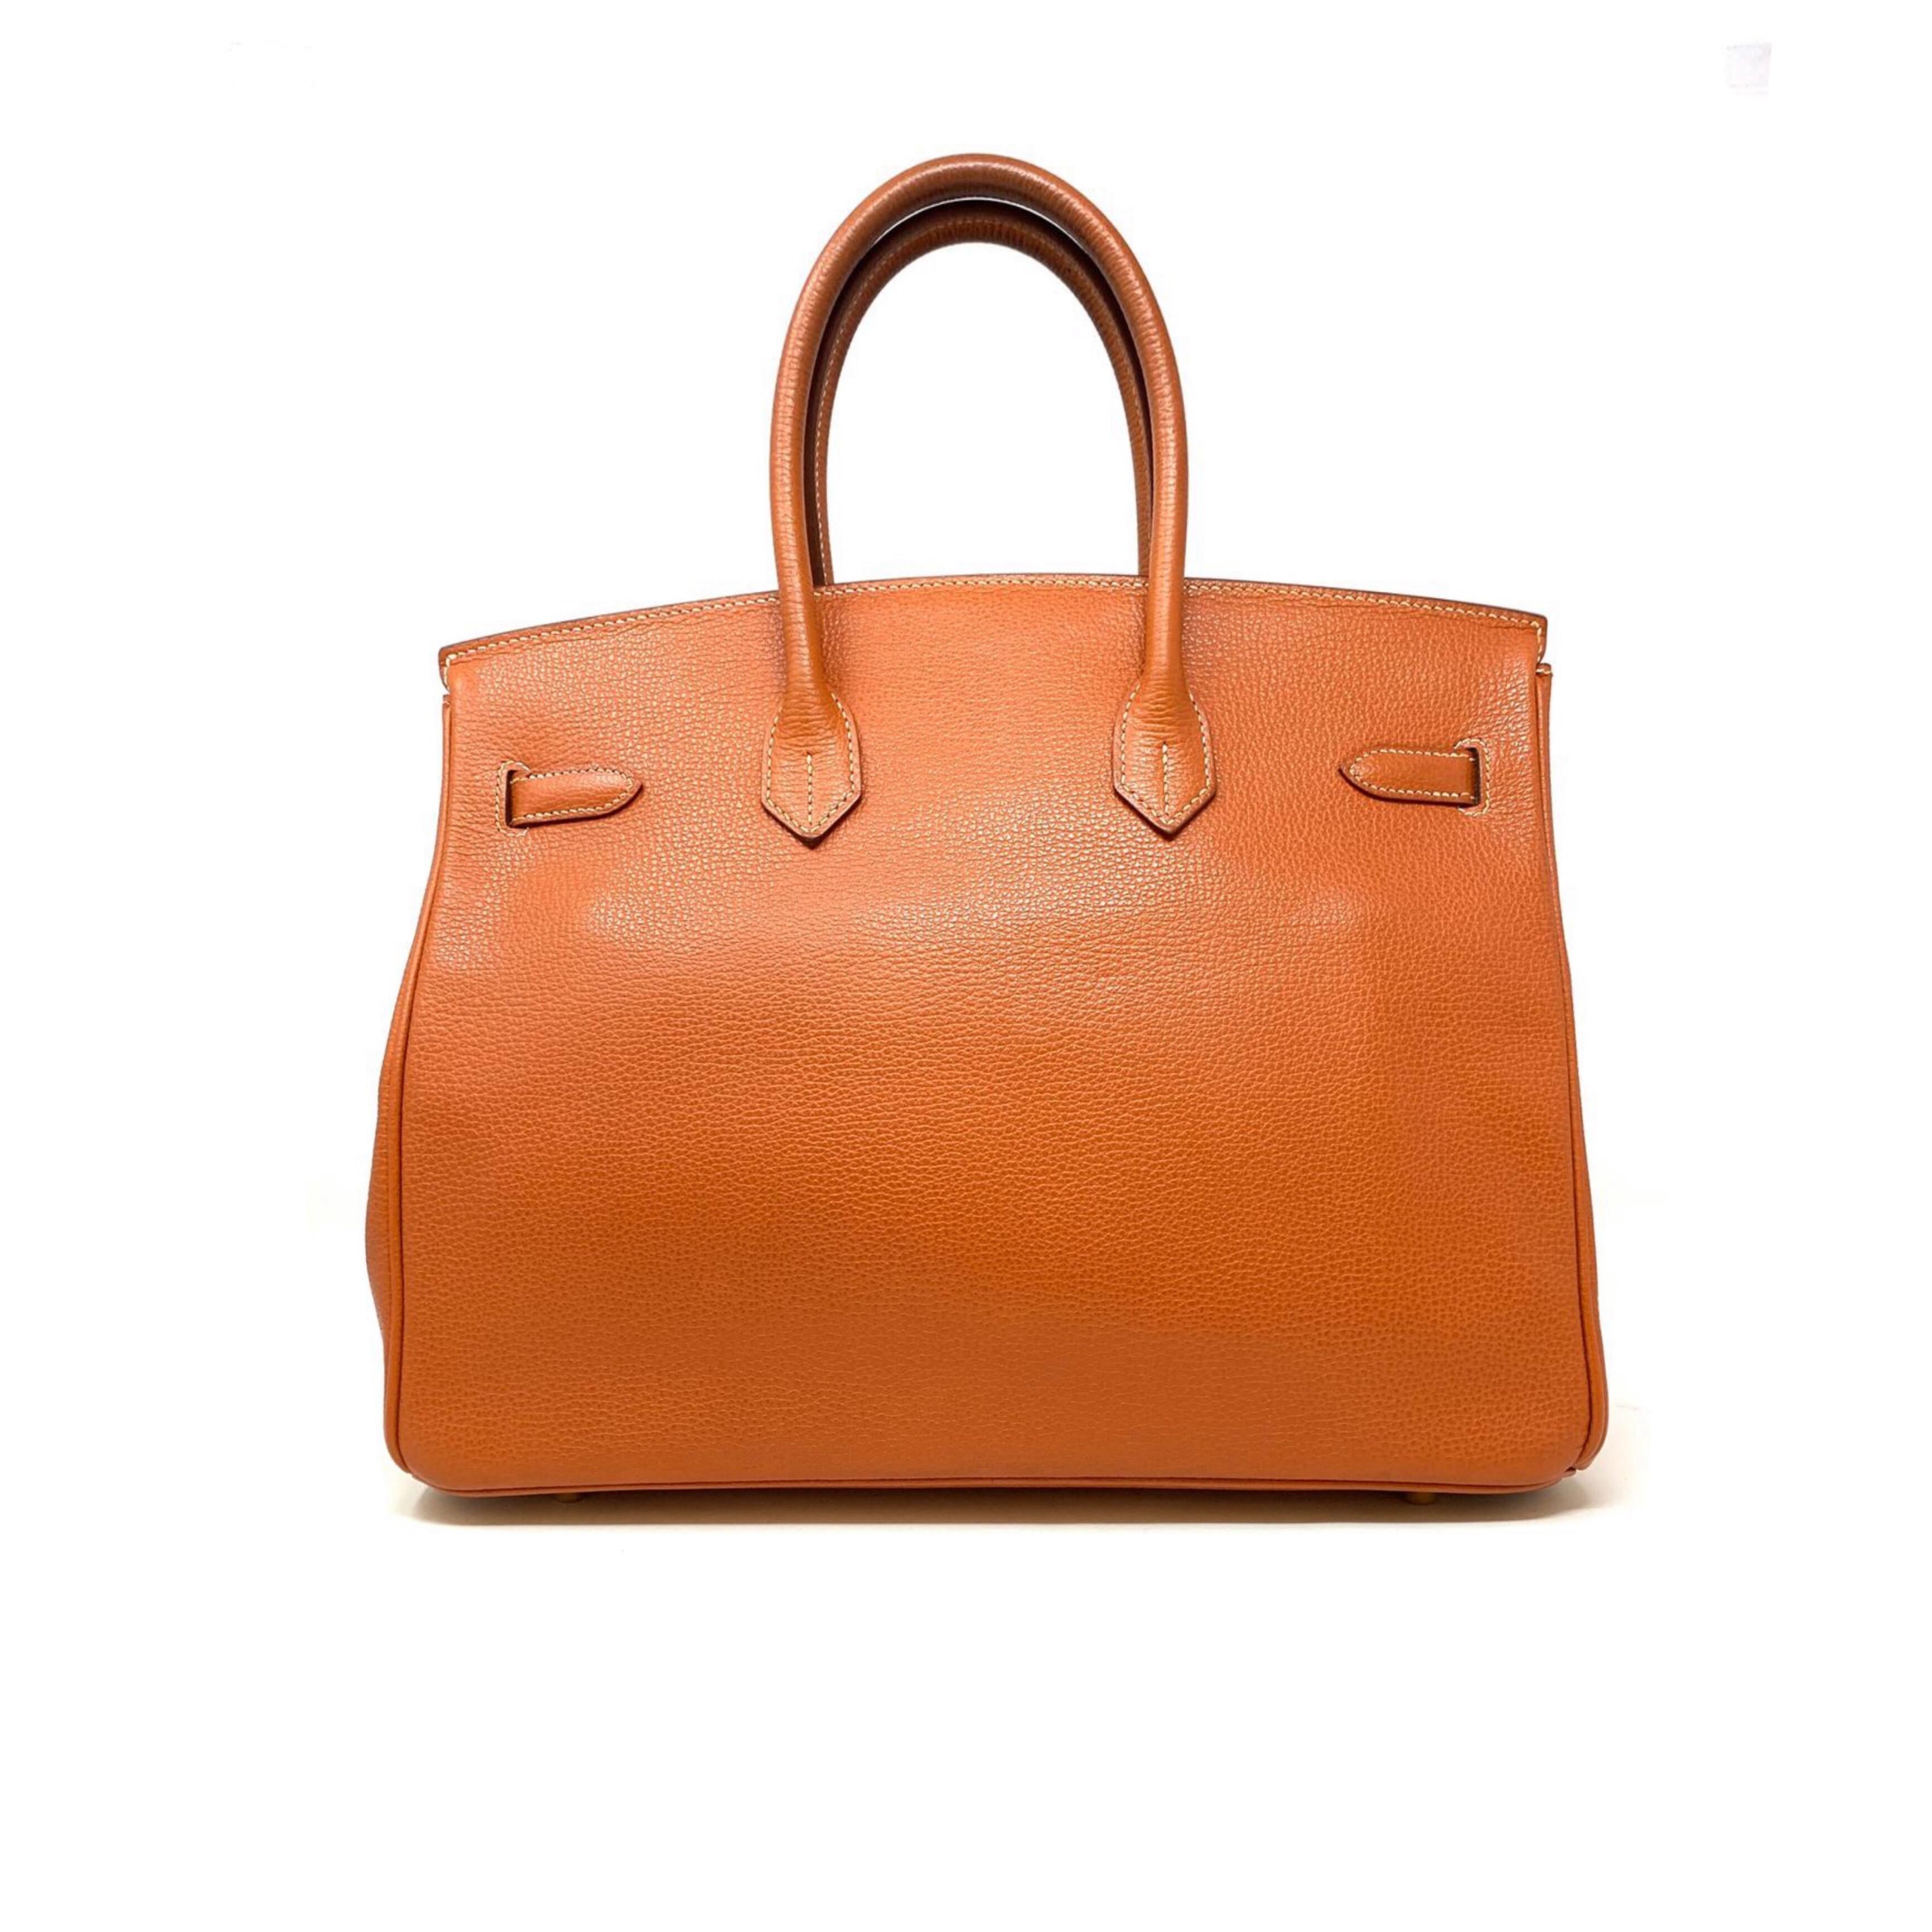 Classic Hermès Sac Birkin bag 35, Veau Epsom Gold Hdw Gold
Is in good condition with small signs of wear inside suede pocket and zip pocket
Year 2007 J in the square
Keylock padlock included. Dut-bag